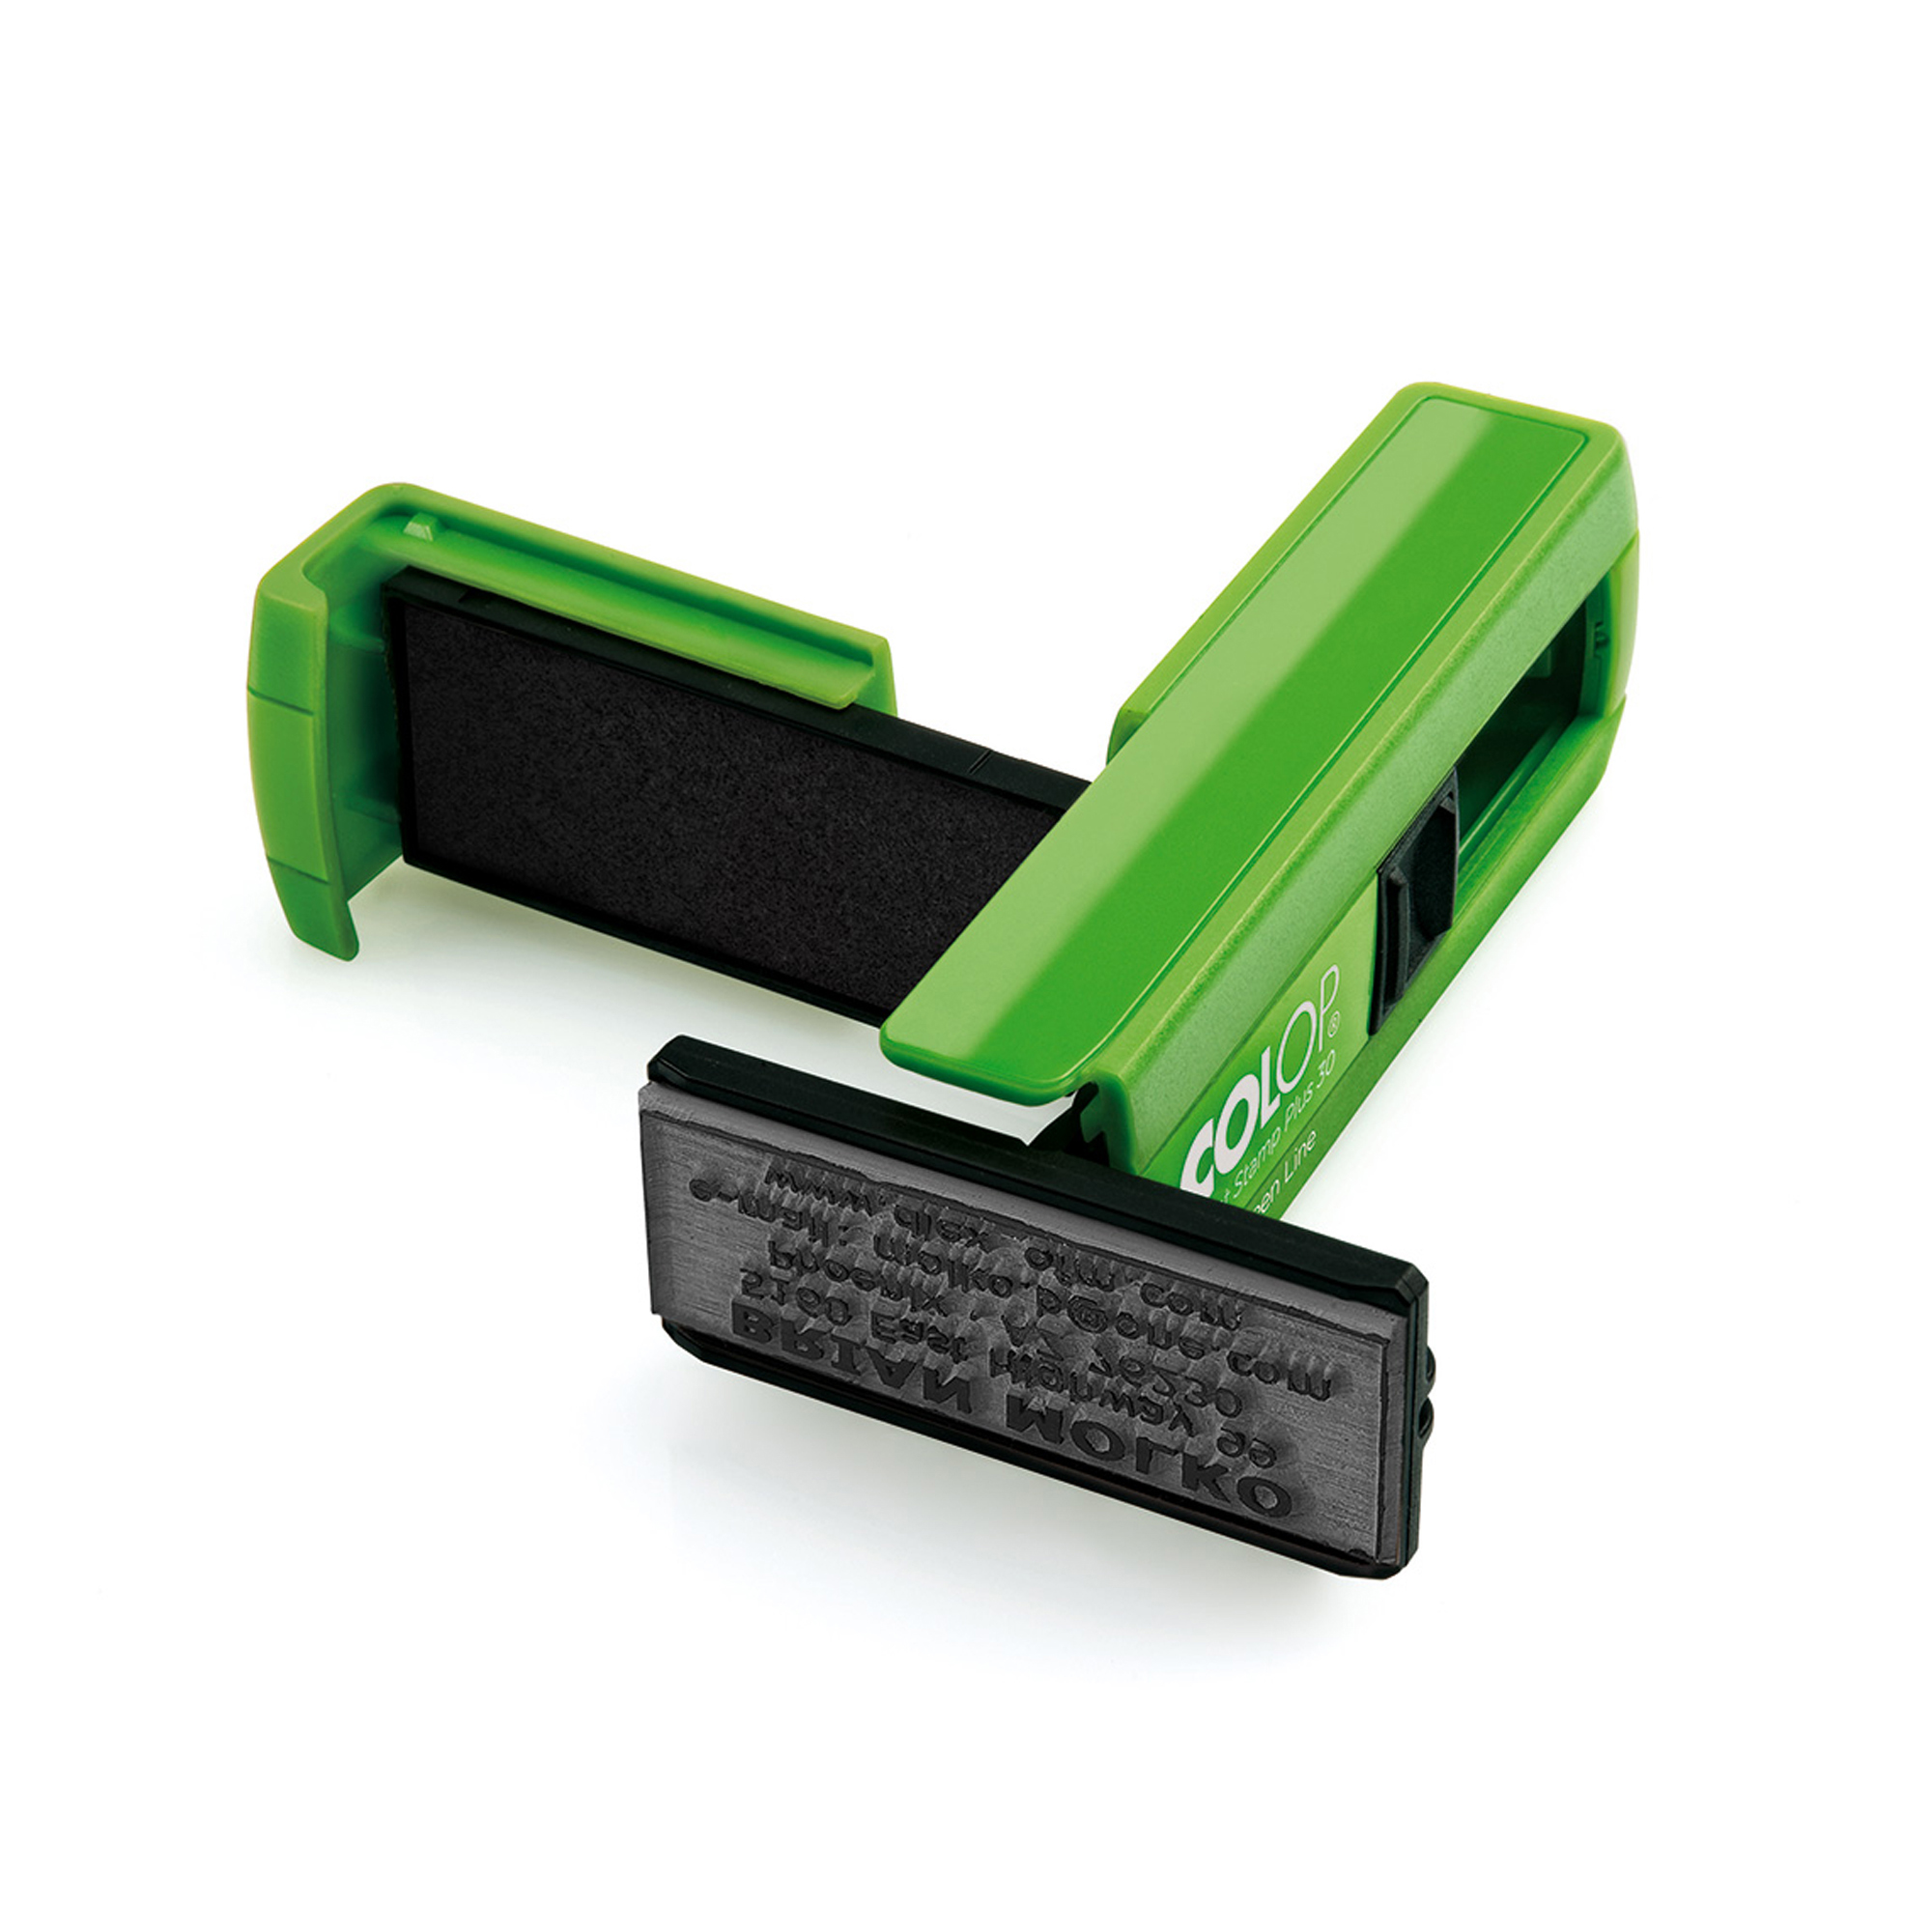 Timbro Pocket Stamp Plus 30 18x47mm 5righe Autoinchiostrante Verde Colop Psp30ve 9004362494515